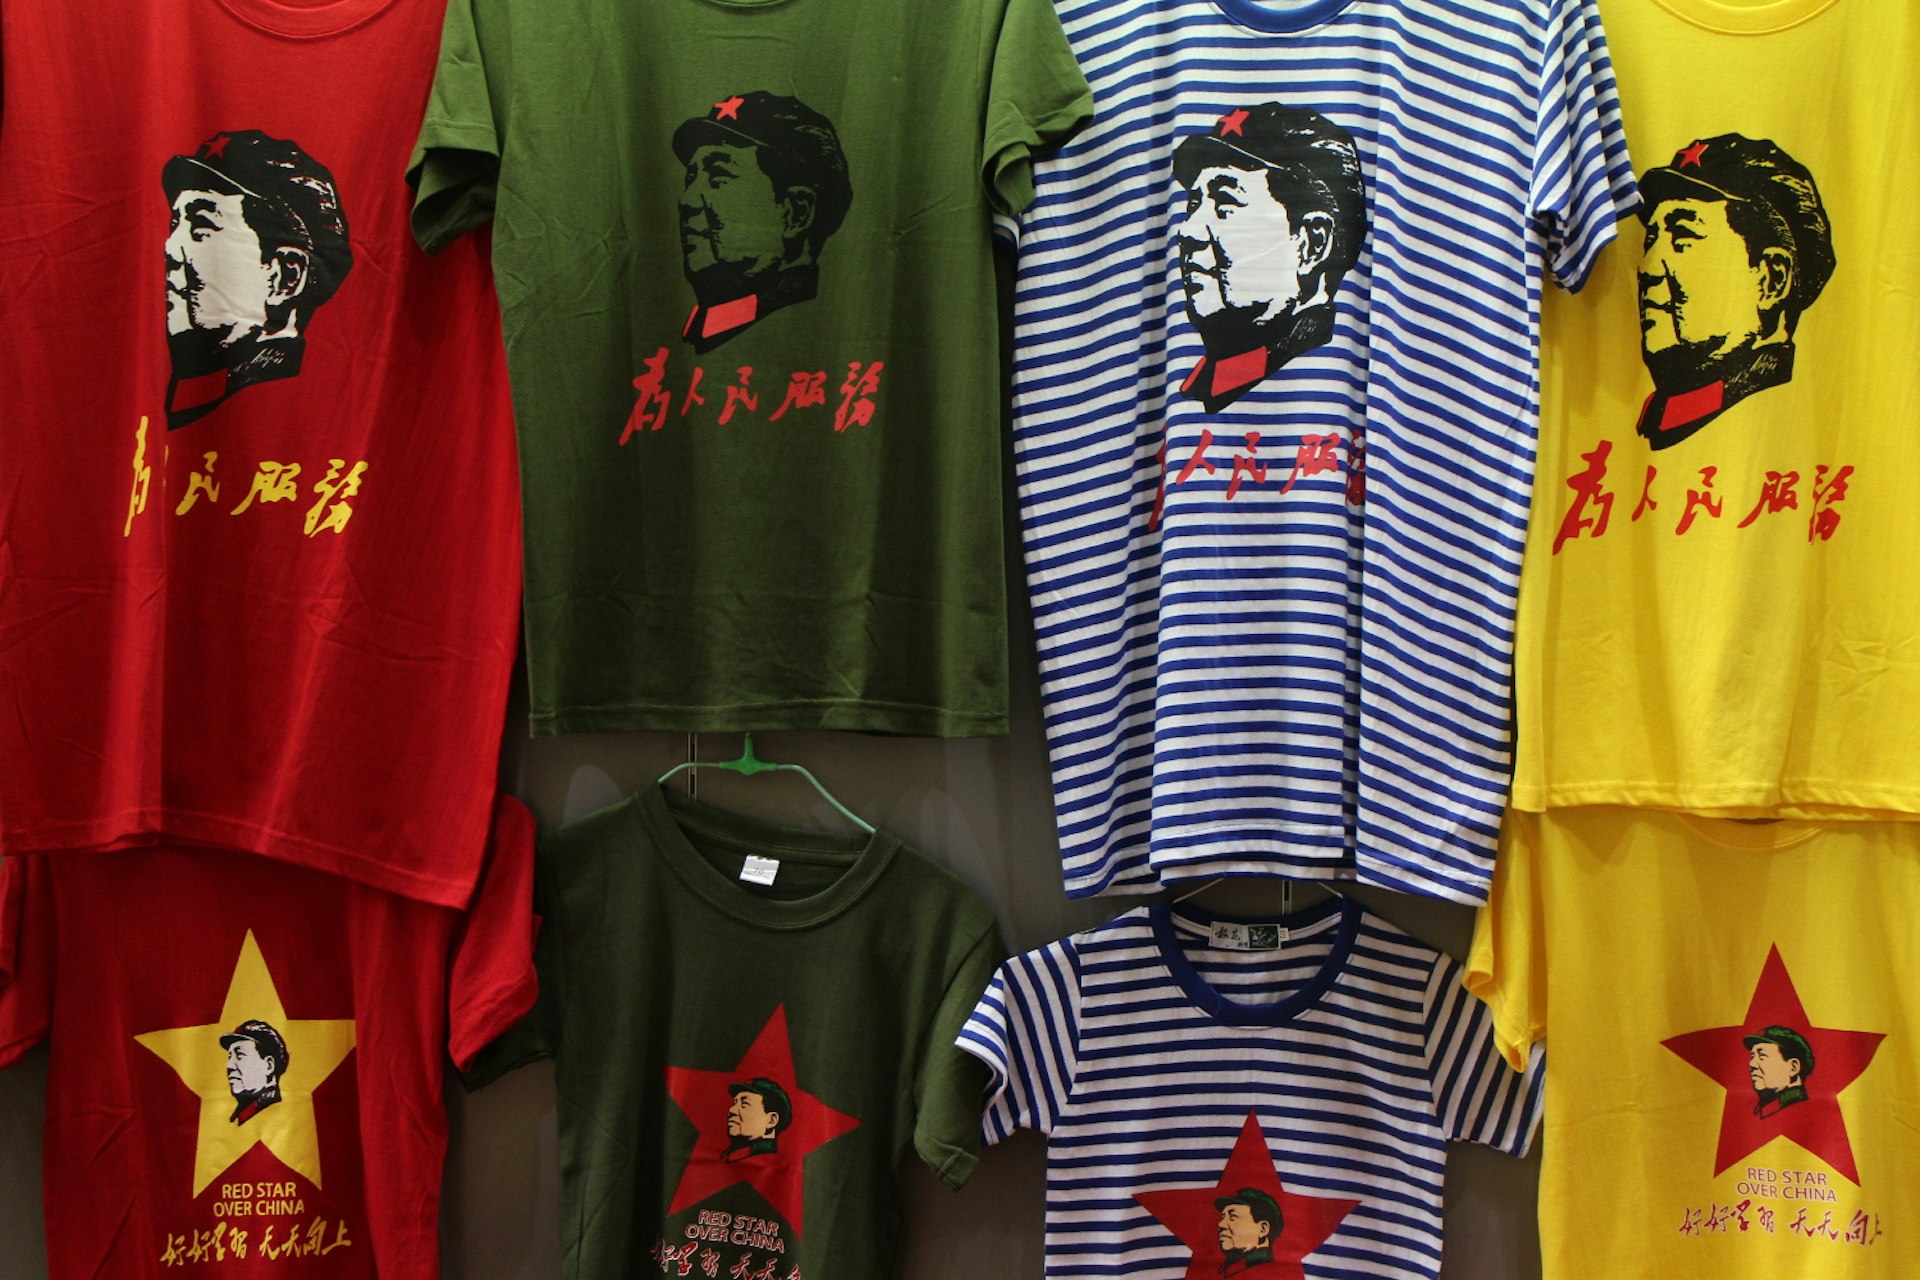 Mao tat: t-shirts mark China's nostalgia for all things red. Image by Thomas Bird / Lonely Planet